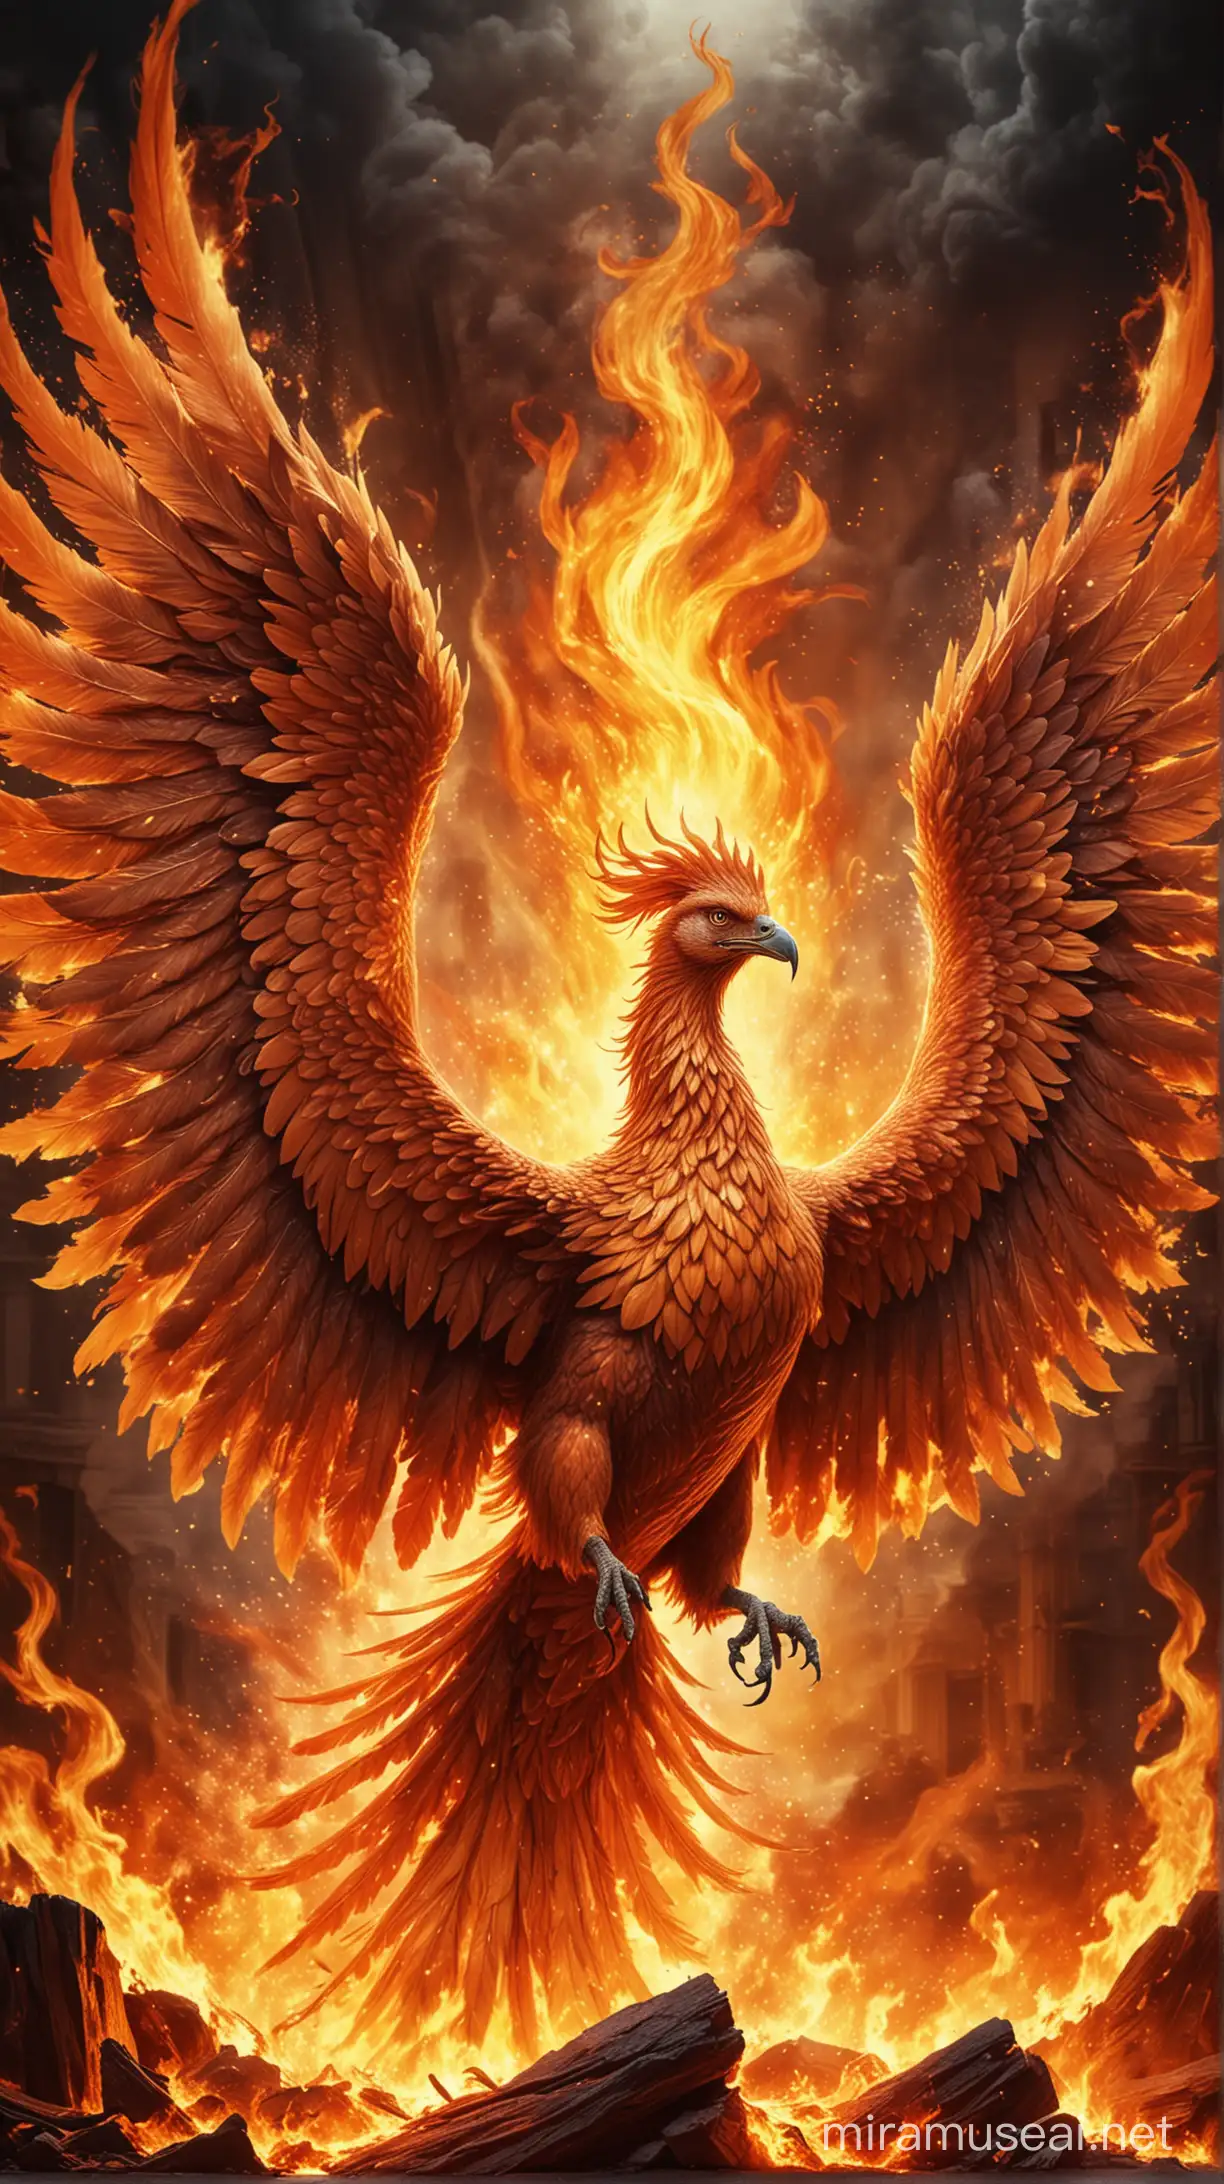  majestic phoenix rising from the flames

